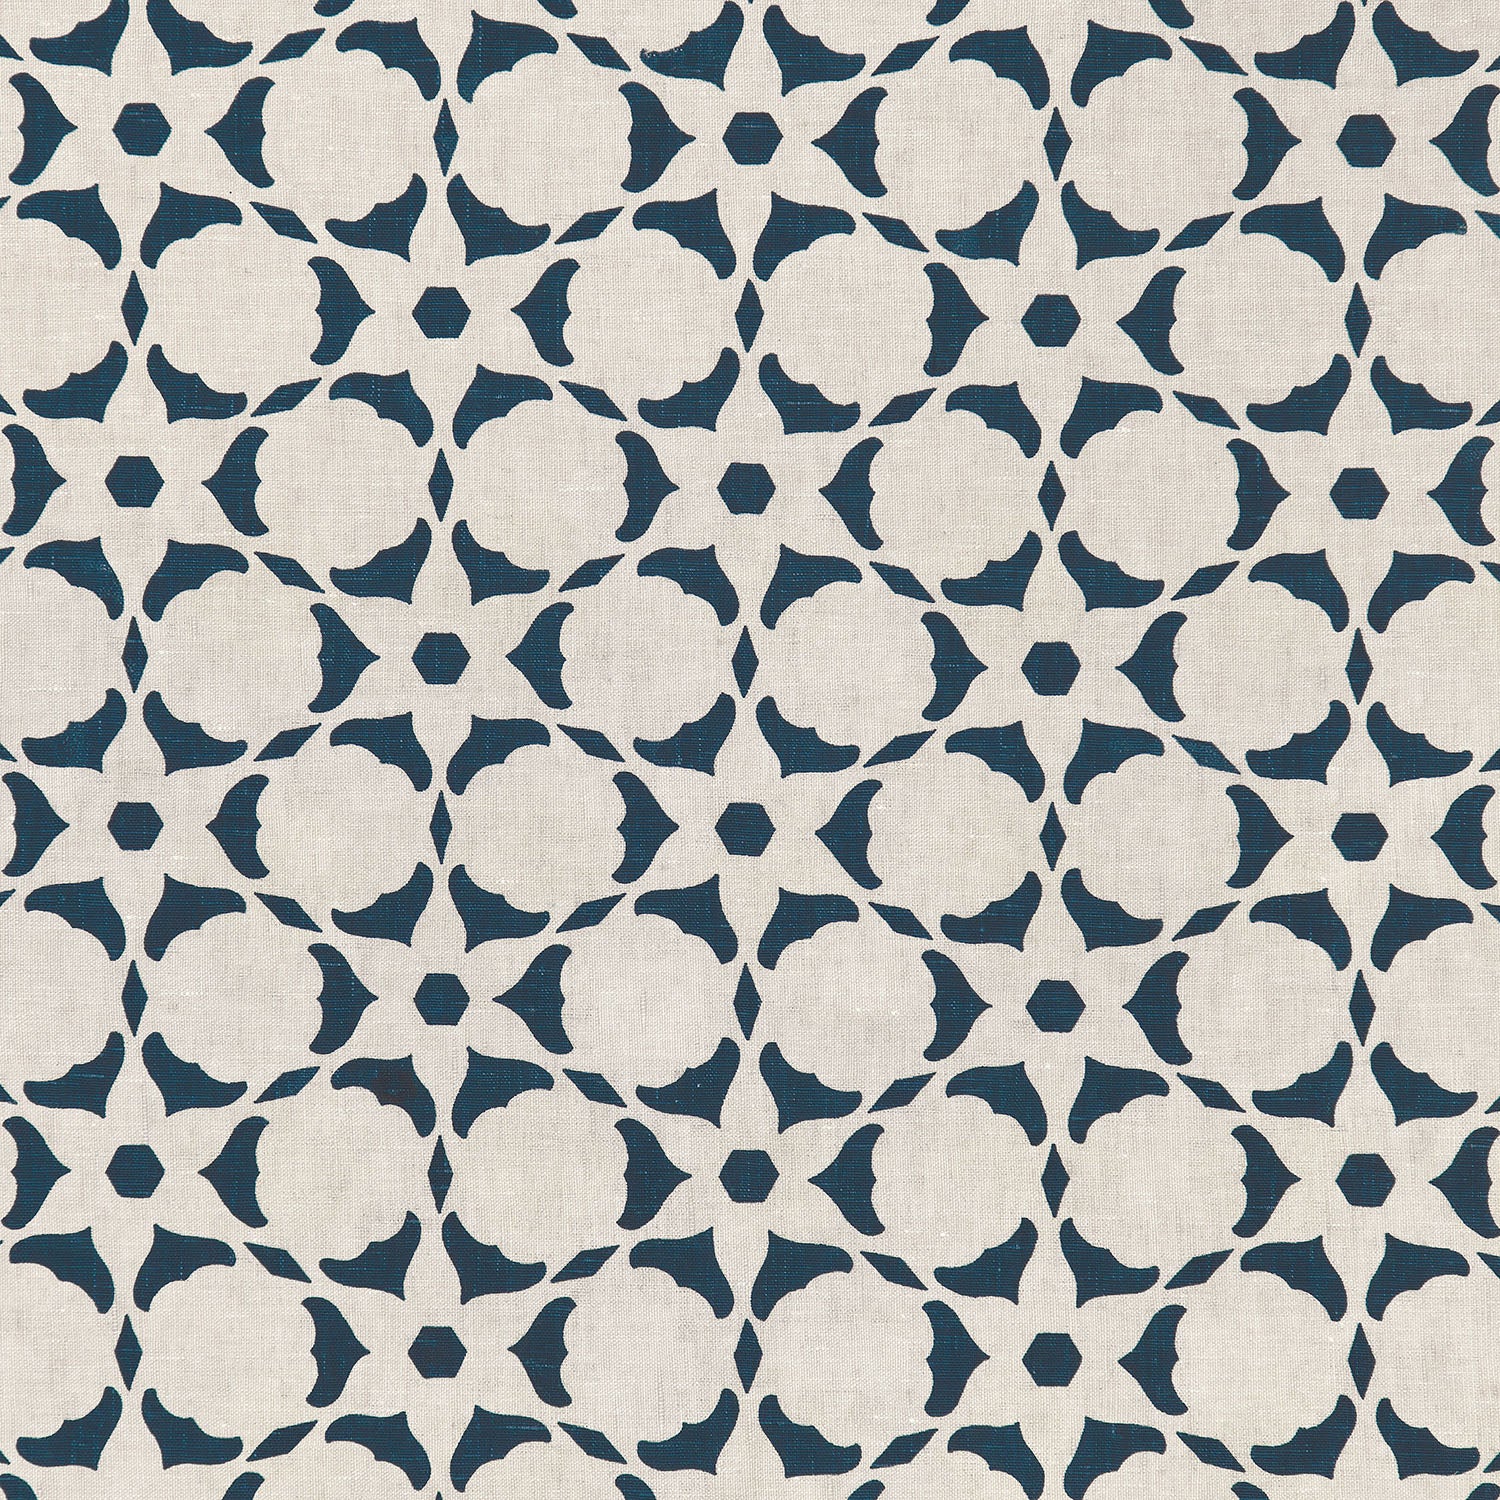 Fabric in a floral lattice print in navy on a cream field.